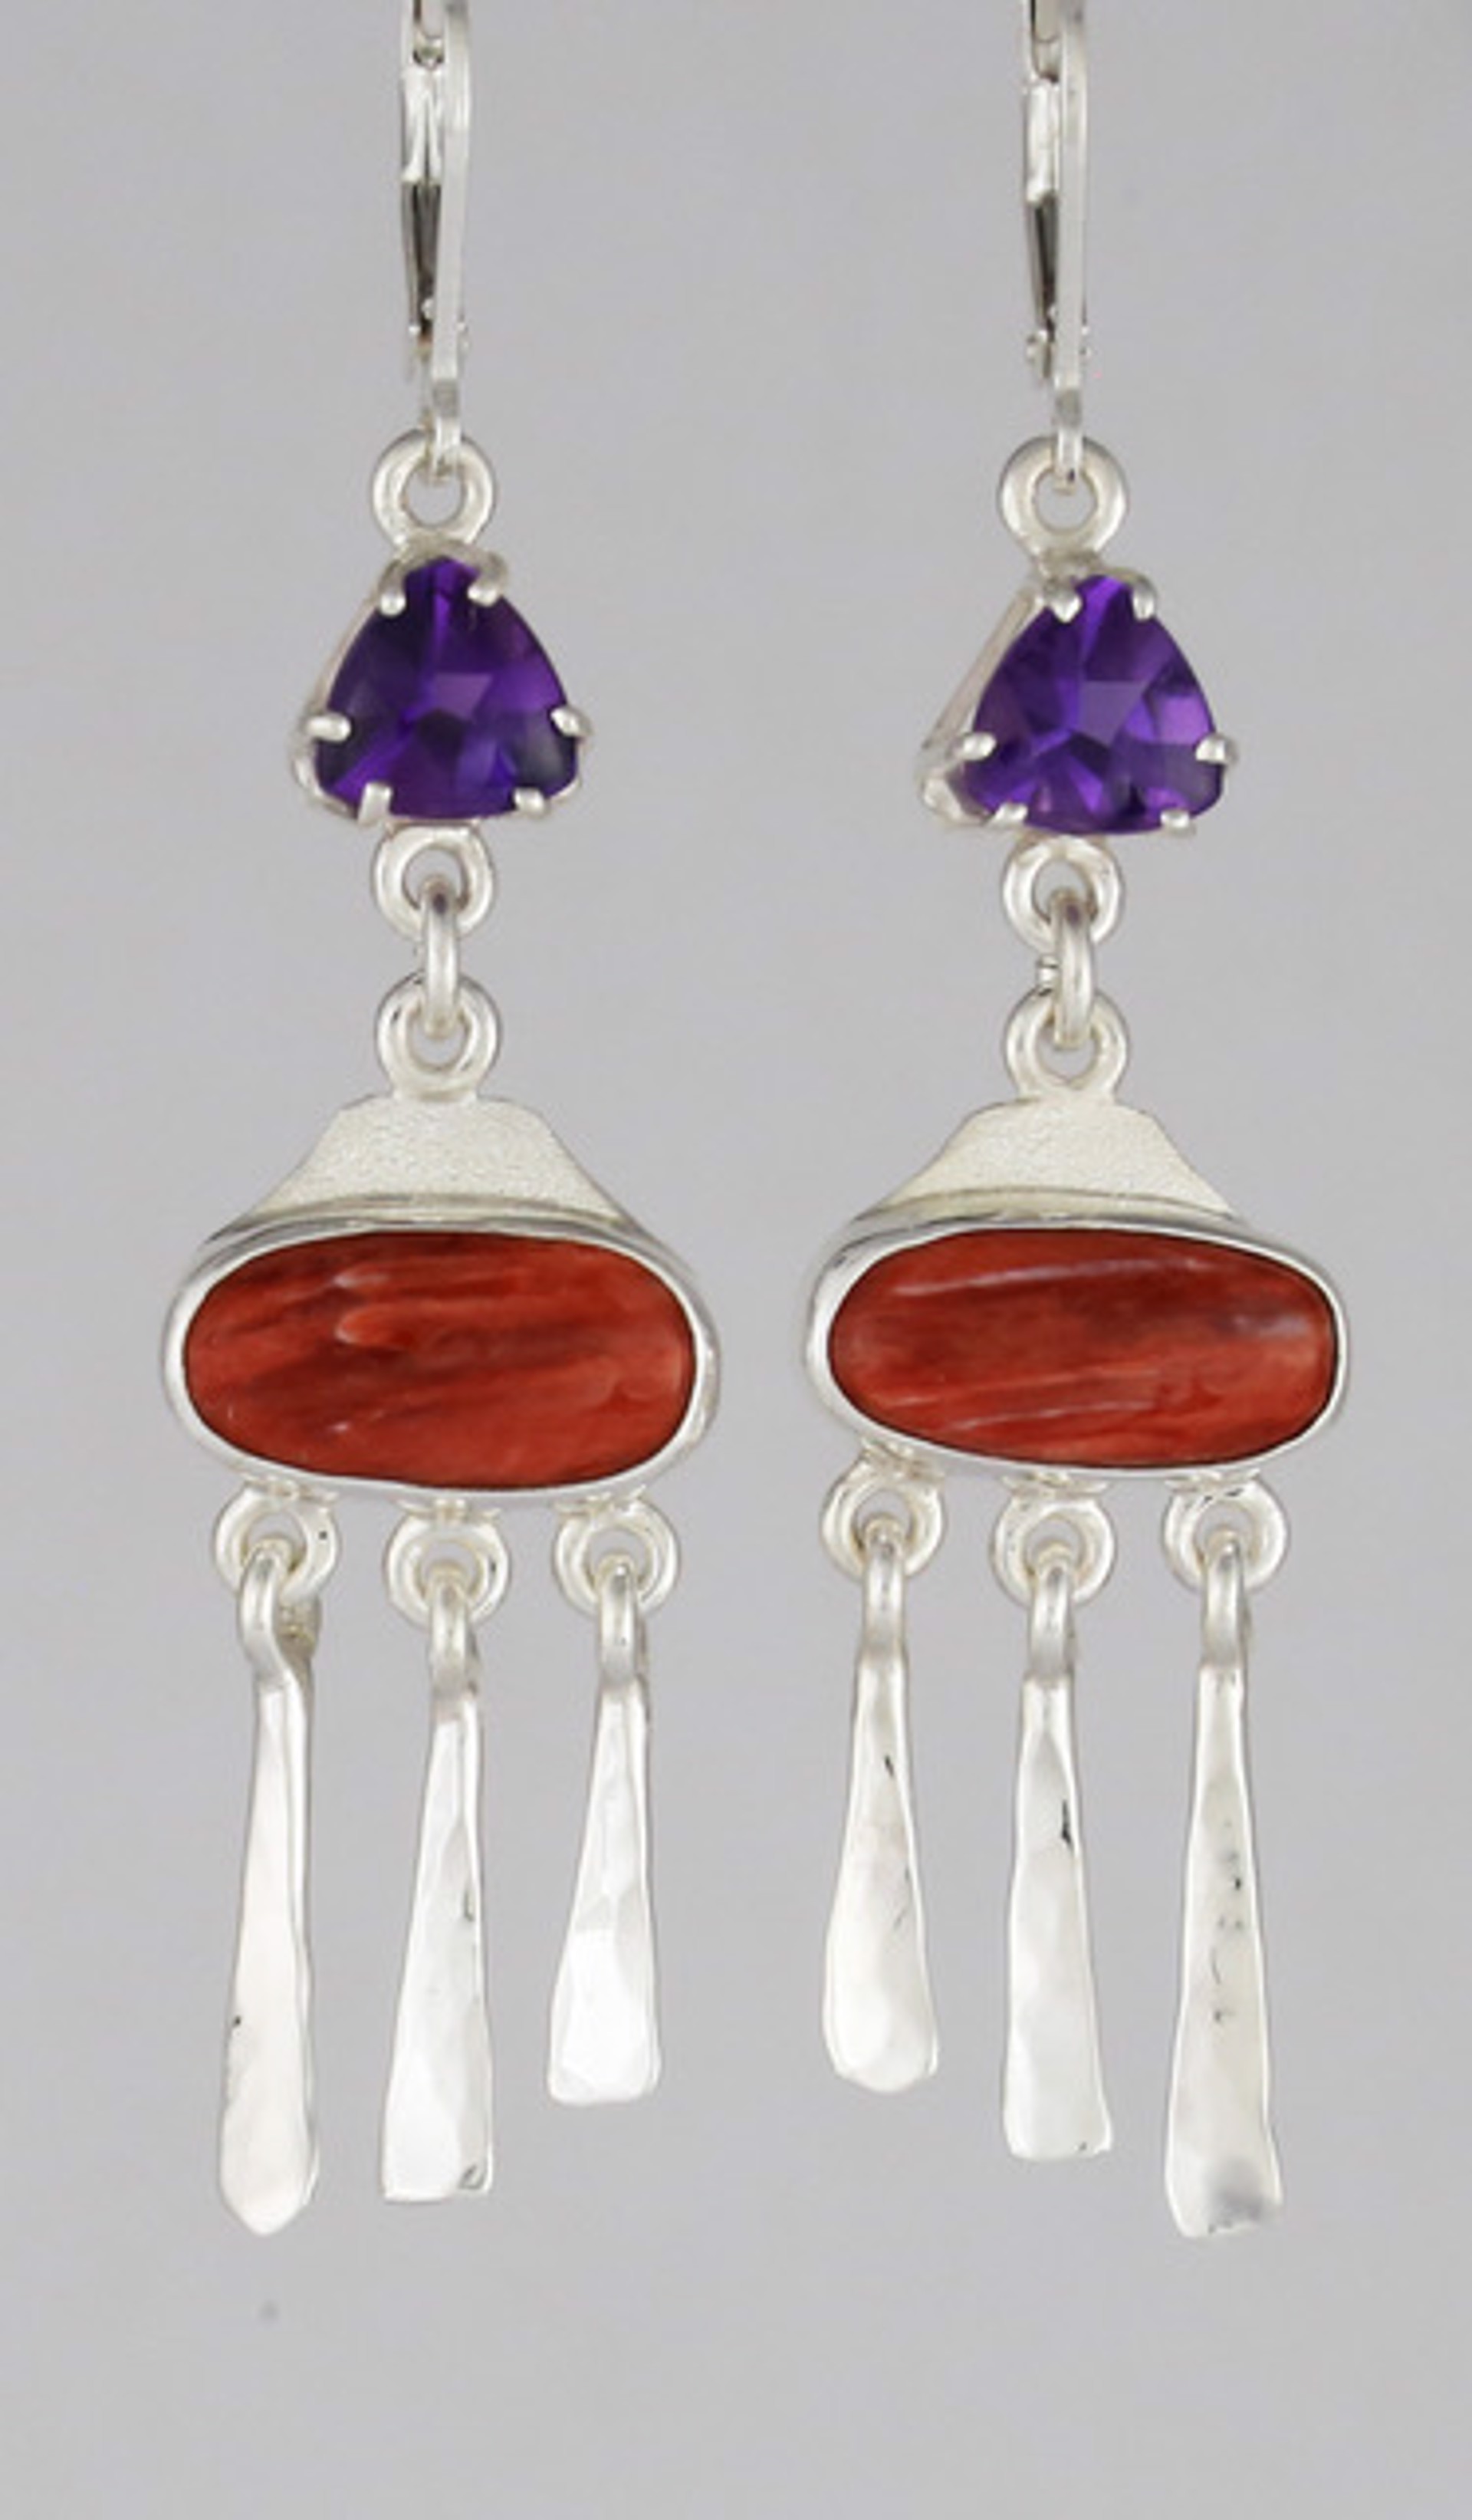 Earrings - Spiney Oyster, Amethyst With Sterling Silver - #417 by Ken and Barbara Newman